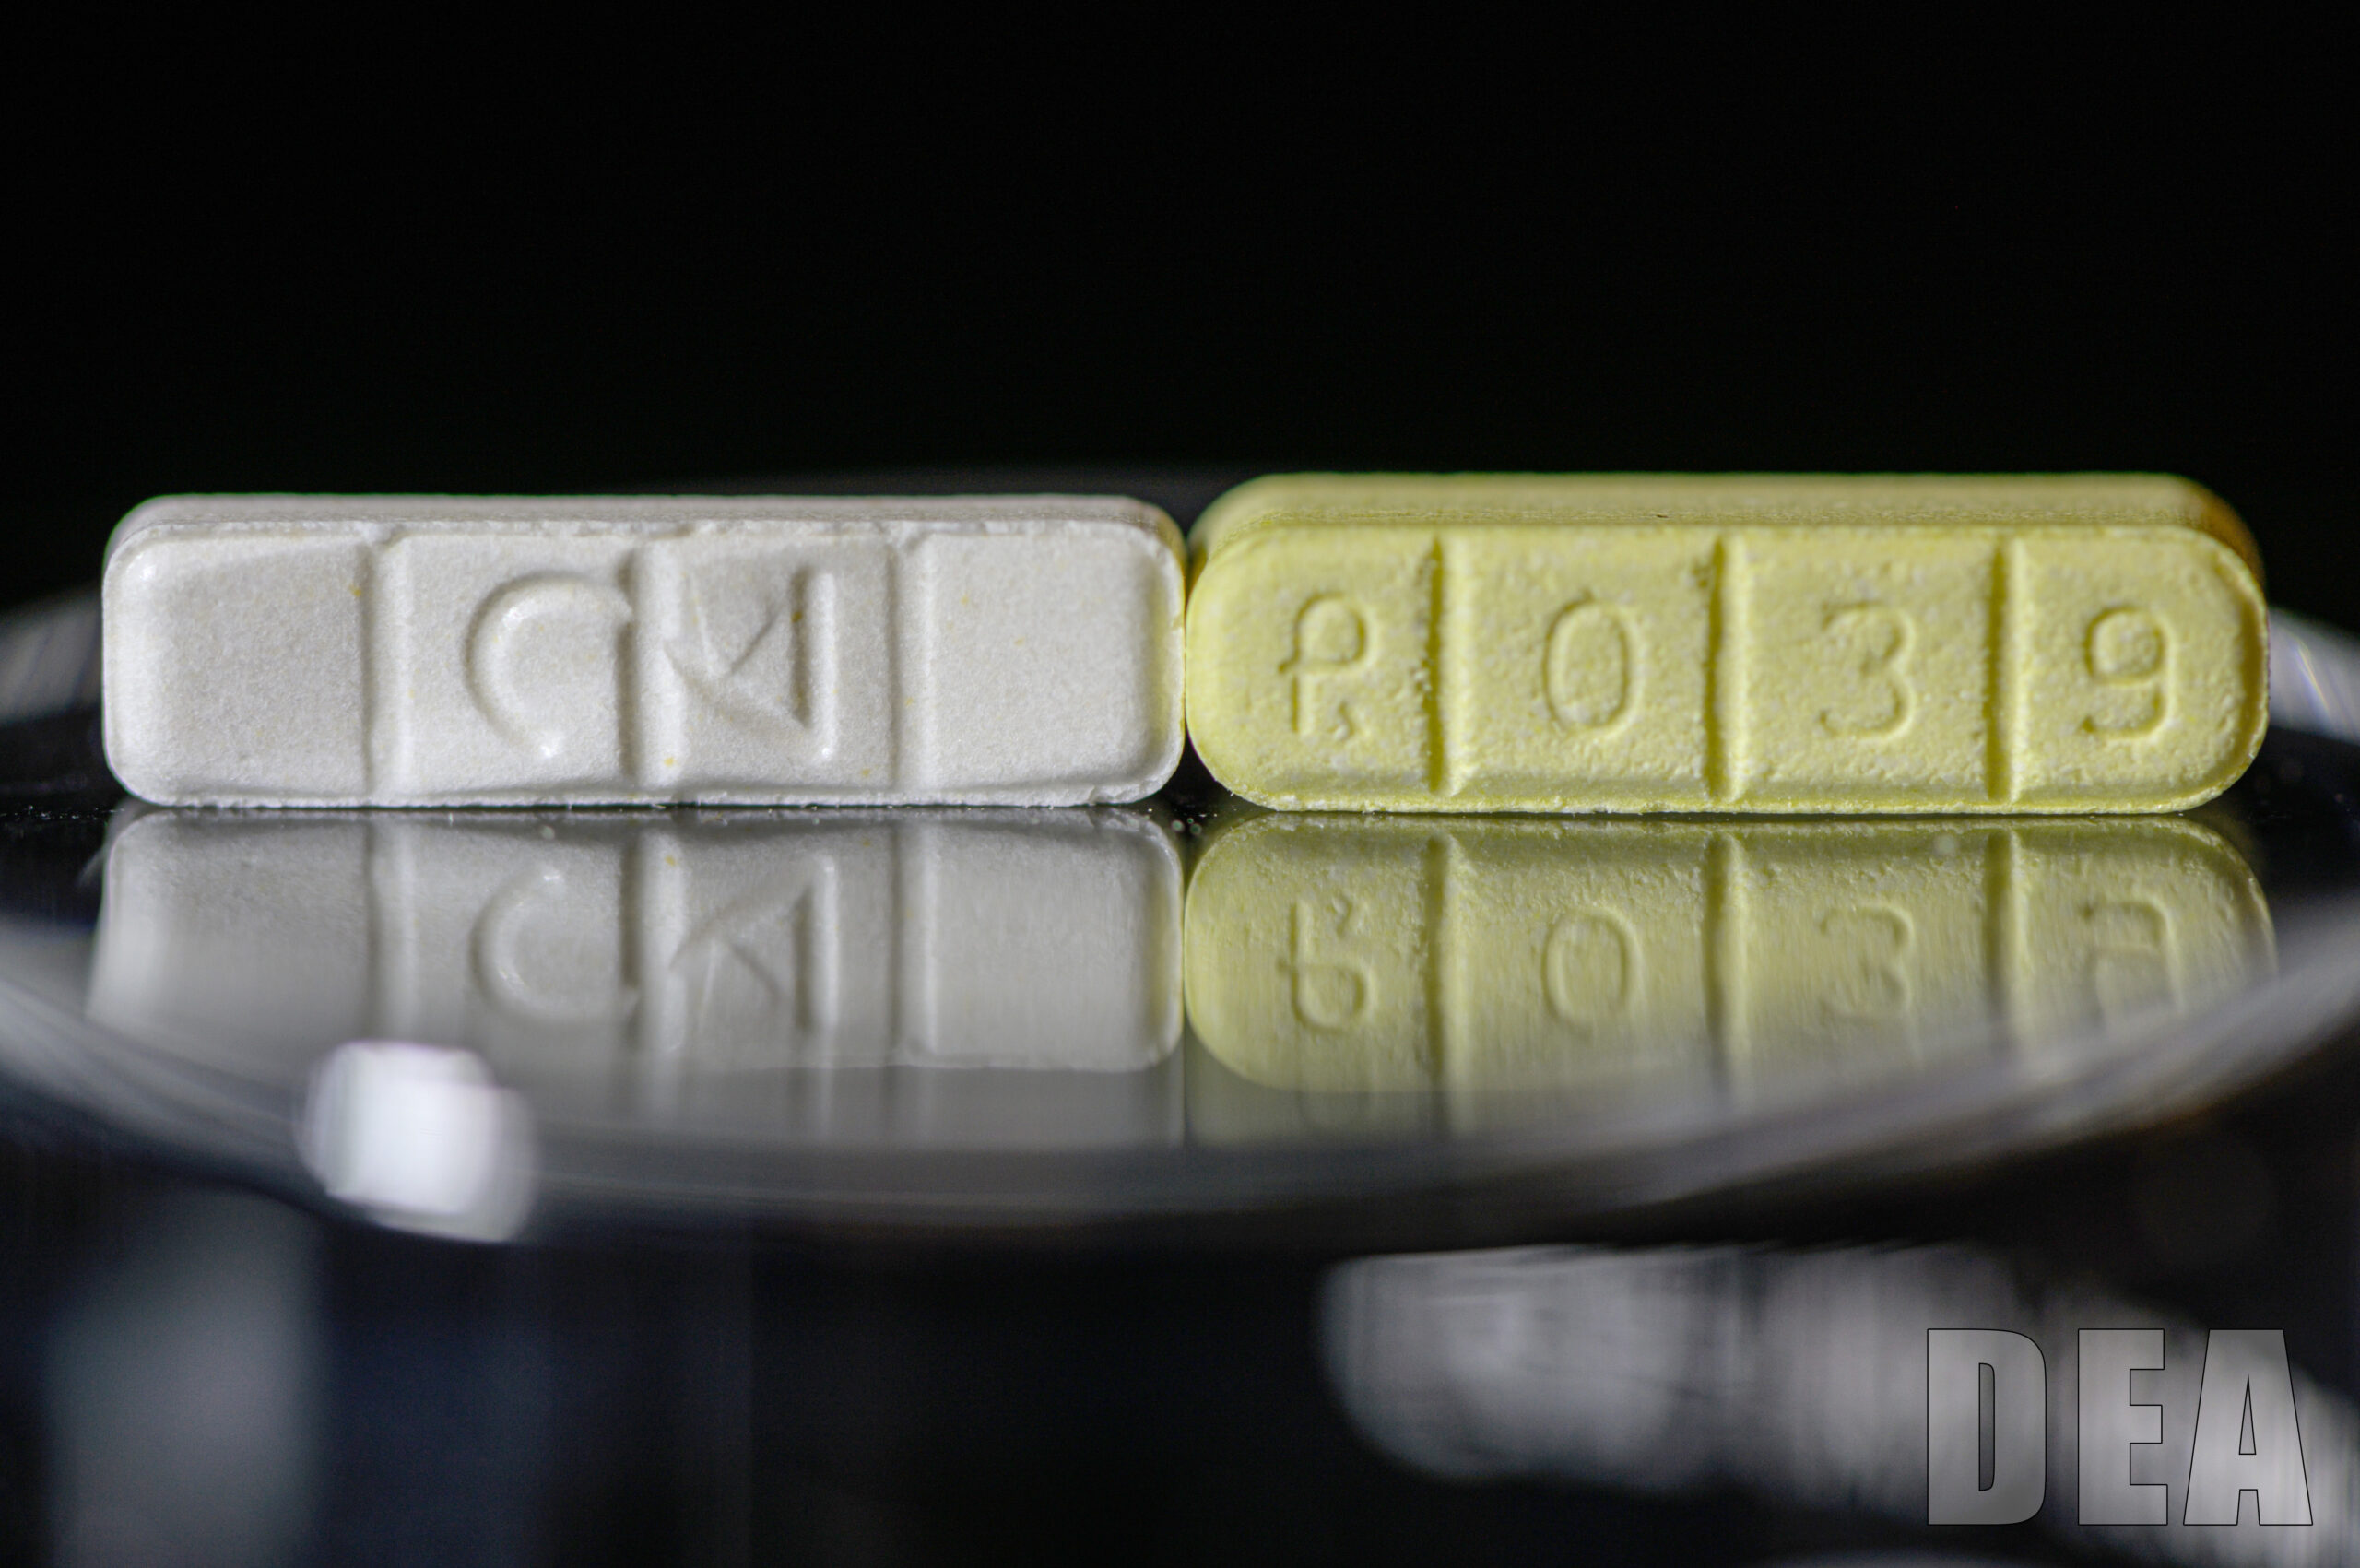 Picture of authentic Xanax, left, & counterfeit Xanax, right show that One Pill Can Kill